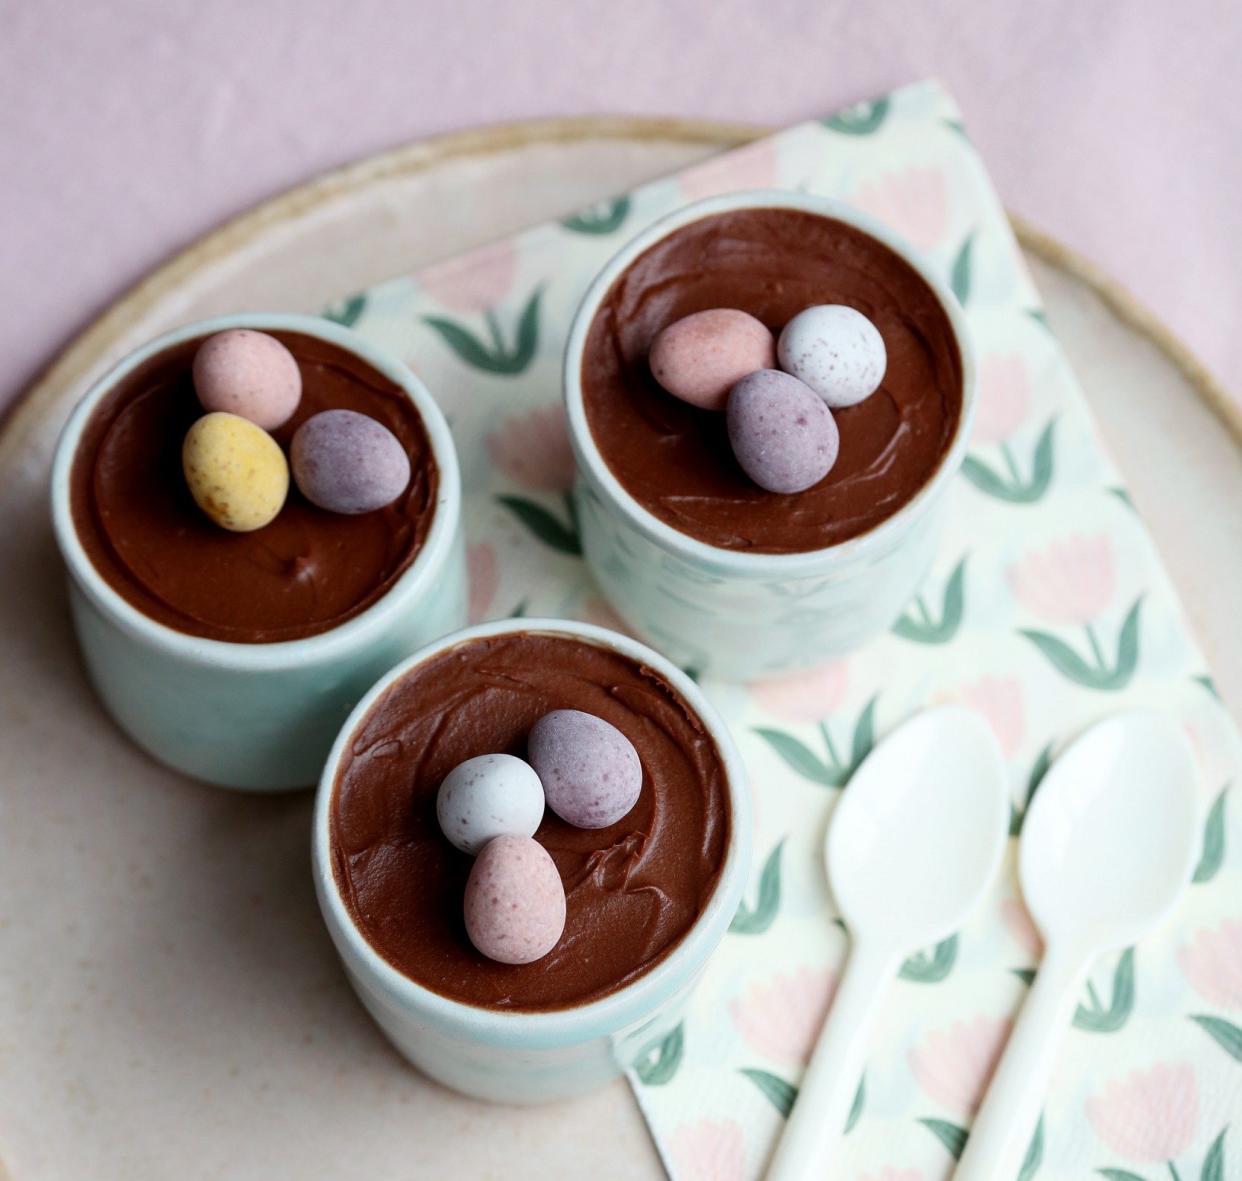 Add a spoonful of salted caramel sauce to the centre of each chocolate pot for added luxury